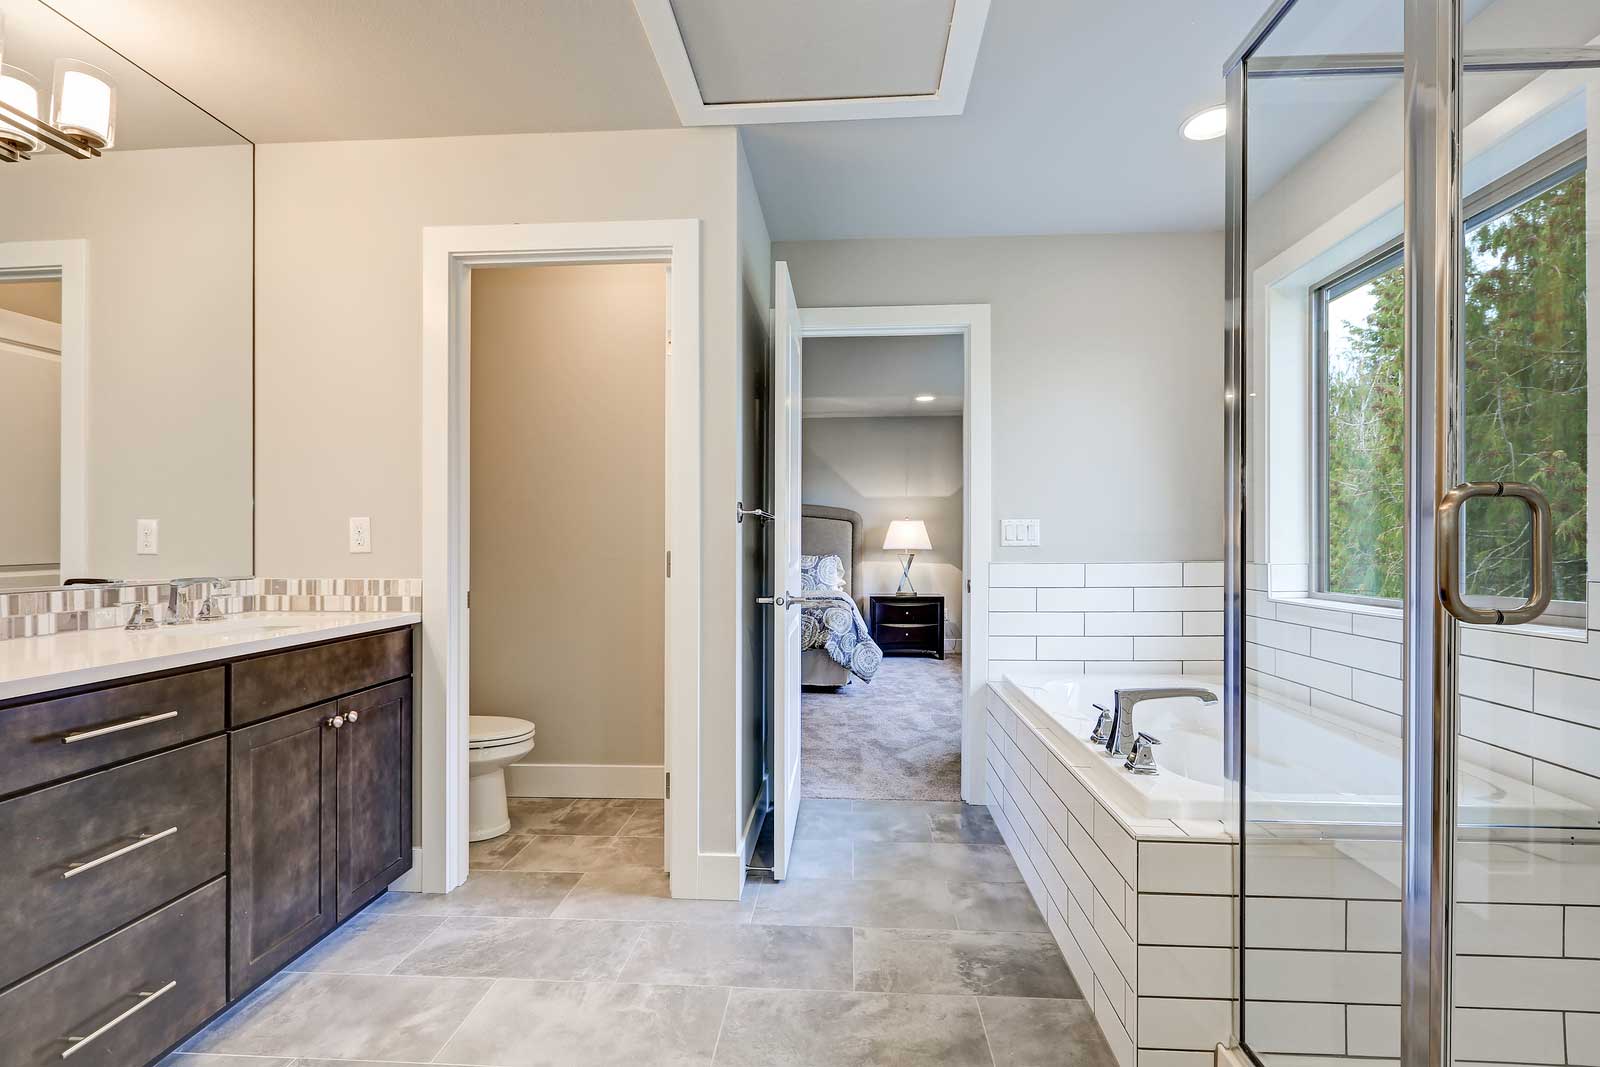 Top 6 Essentials to Remember During Bathroom Remodeling